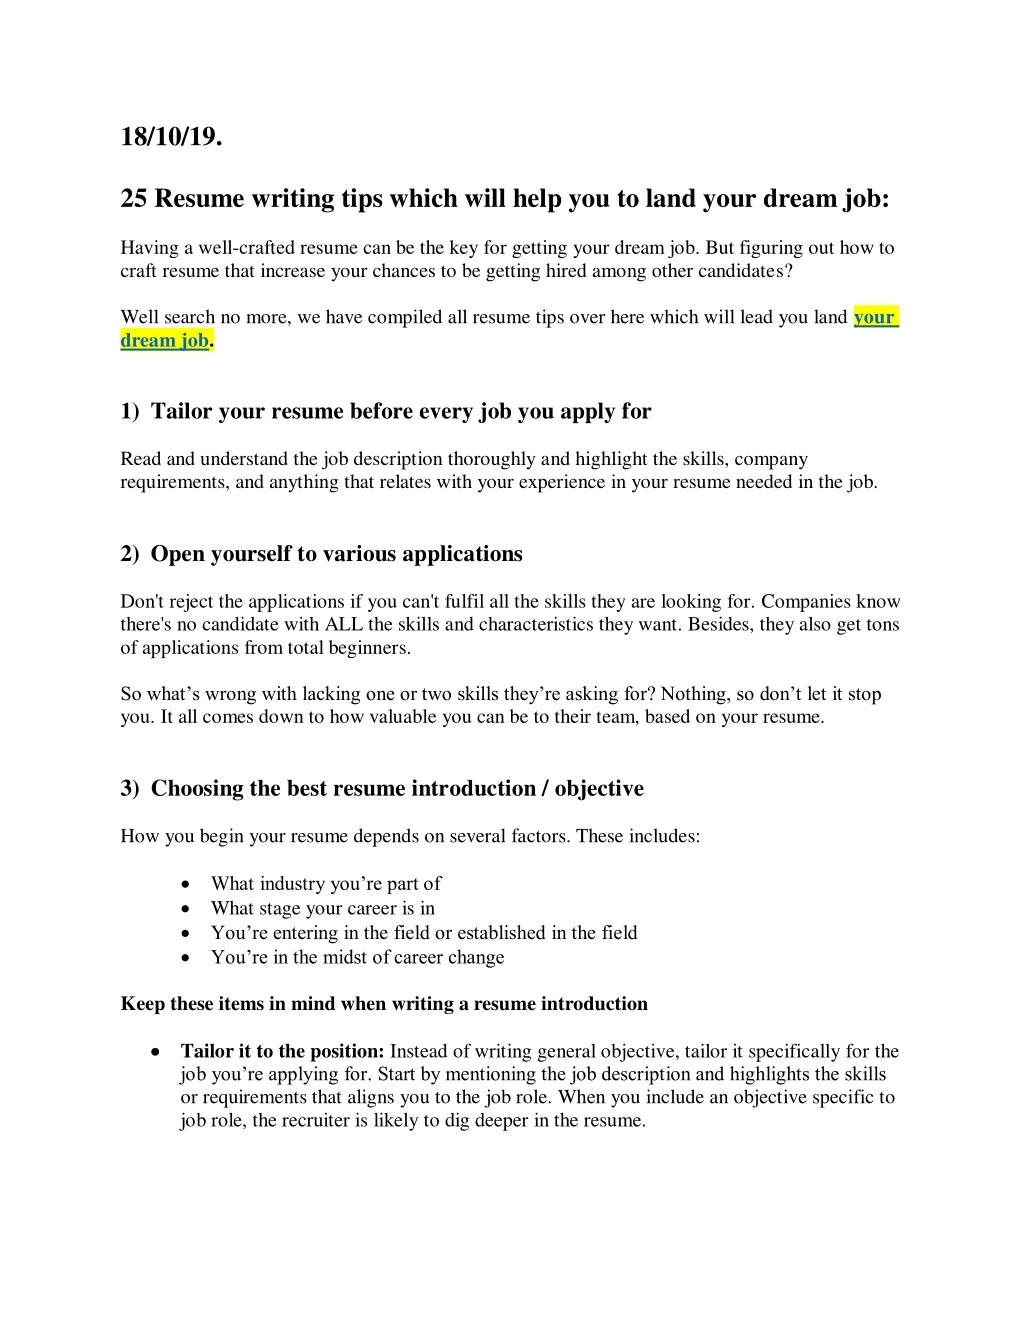 18 10 19 25 resume writing tips which will help